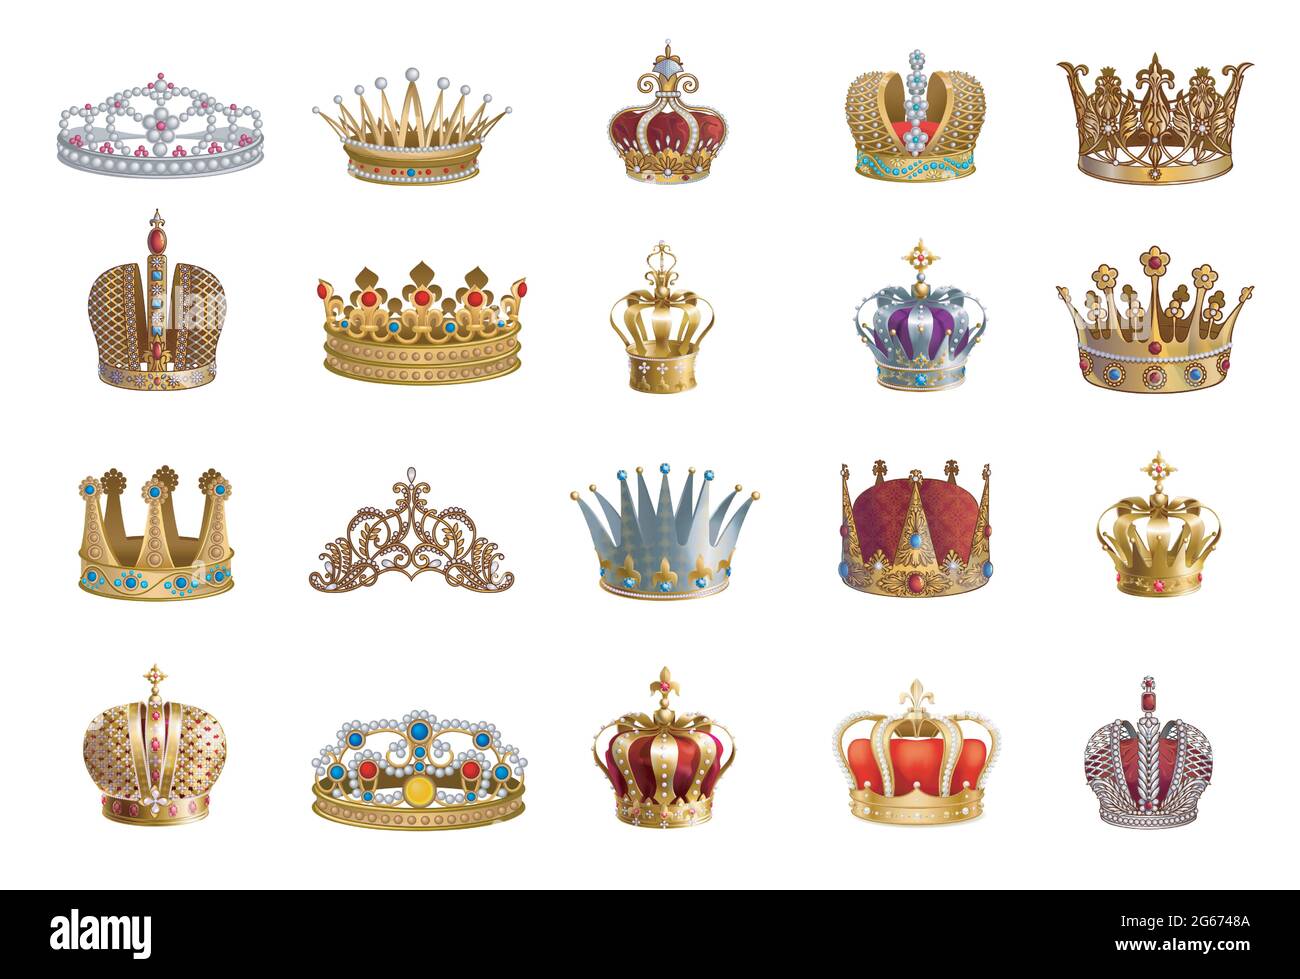 Illustration set of crowns with precious stones Stock Vector Image ...